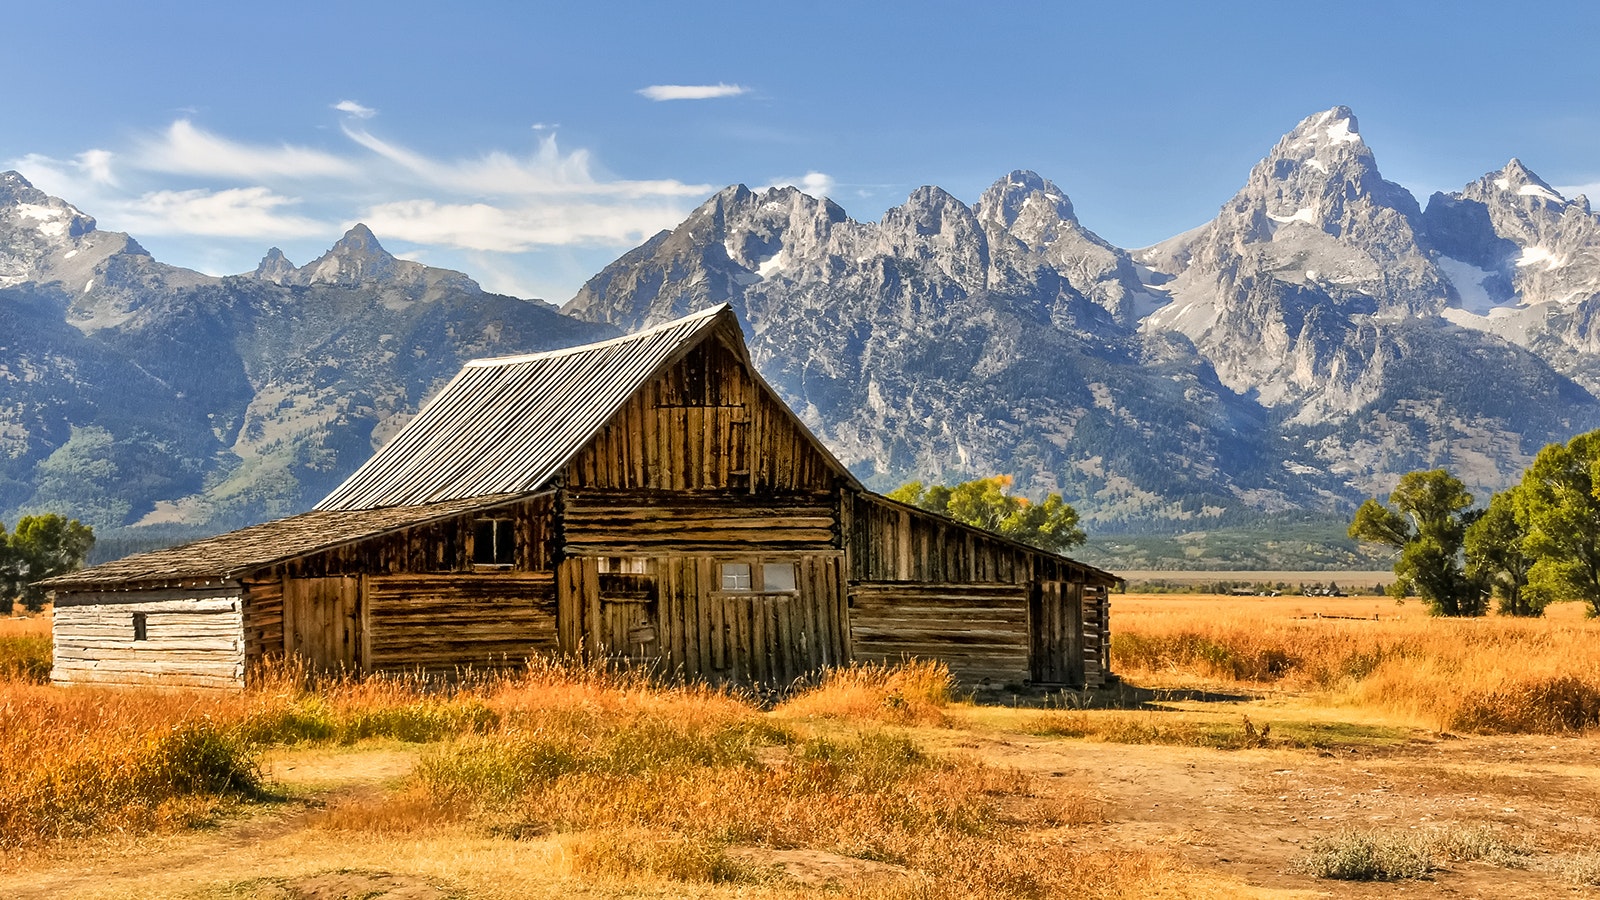 The TA Moulton Barn on Mormon Row in Grand Teton National Park widely considered the most photographed barn on the planet.